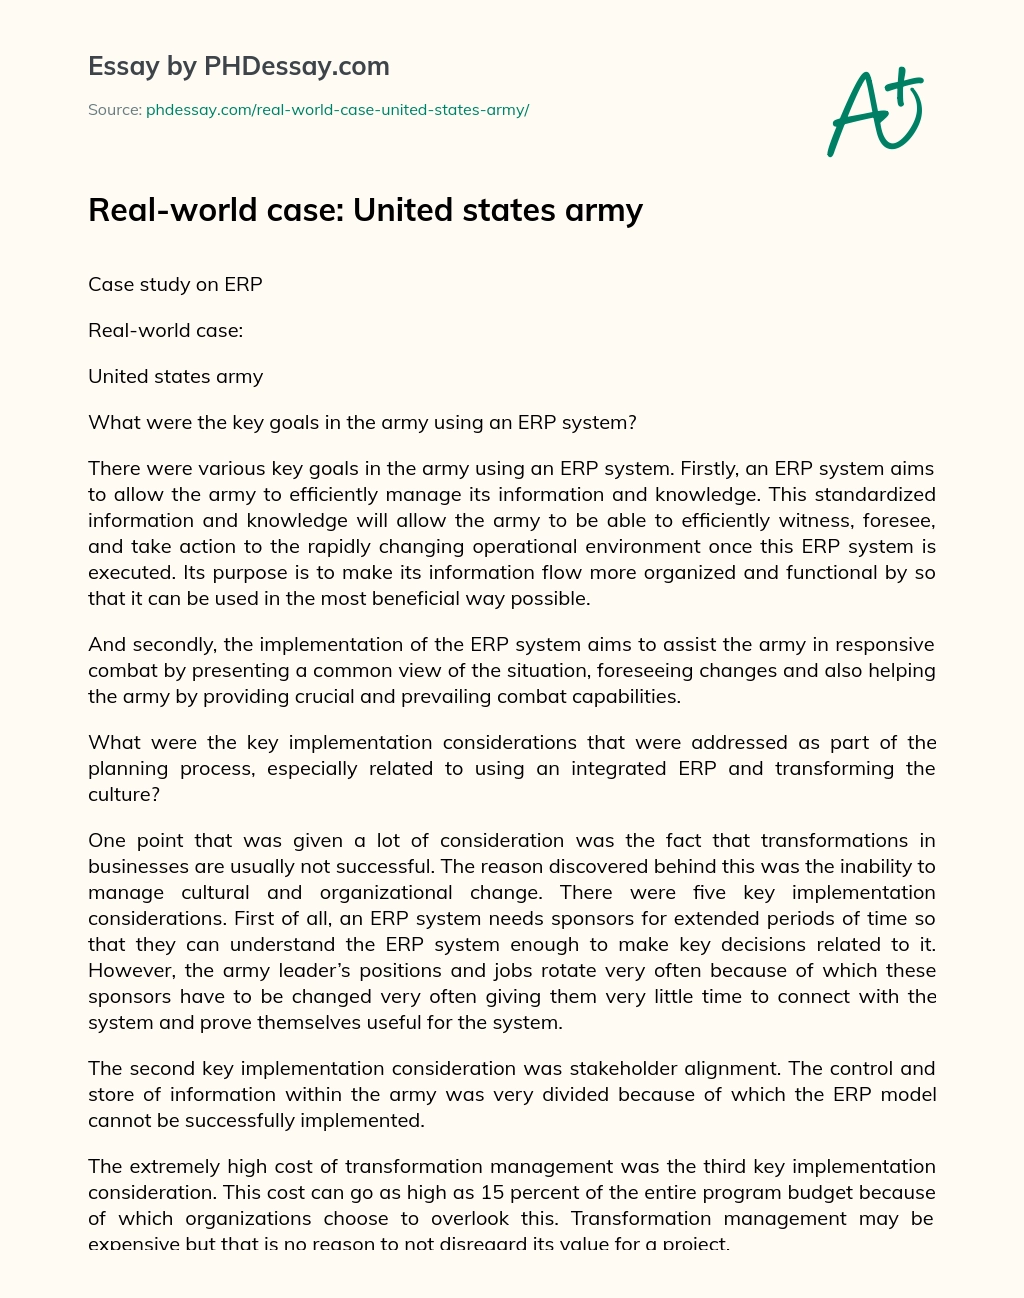 Real-world case: United states army essay